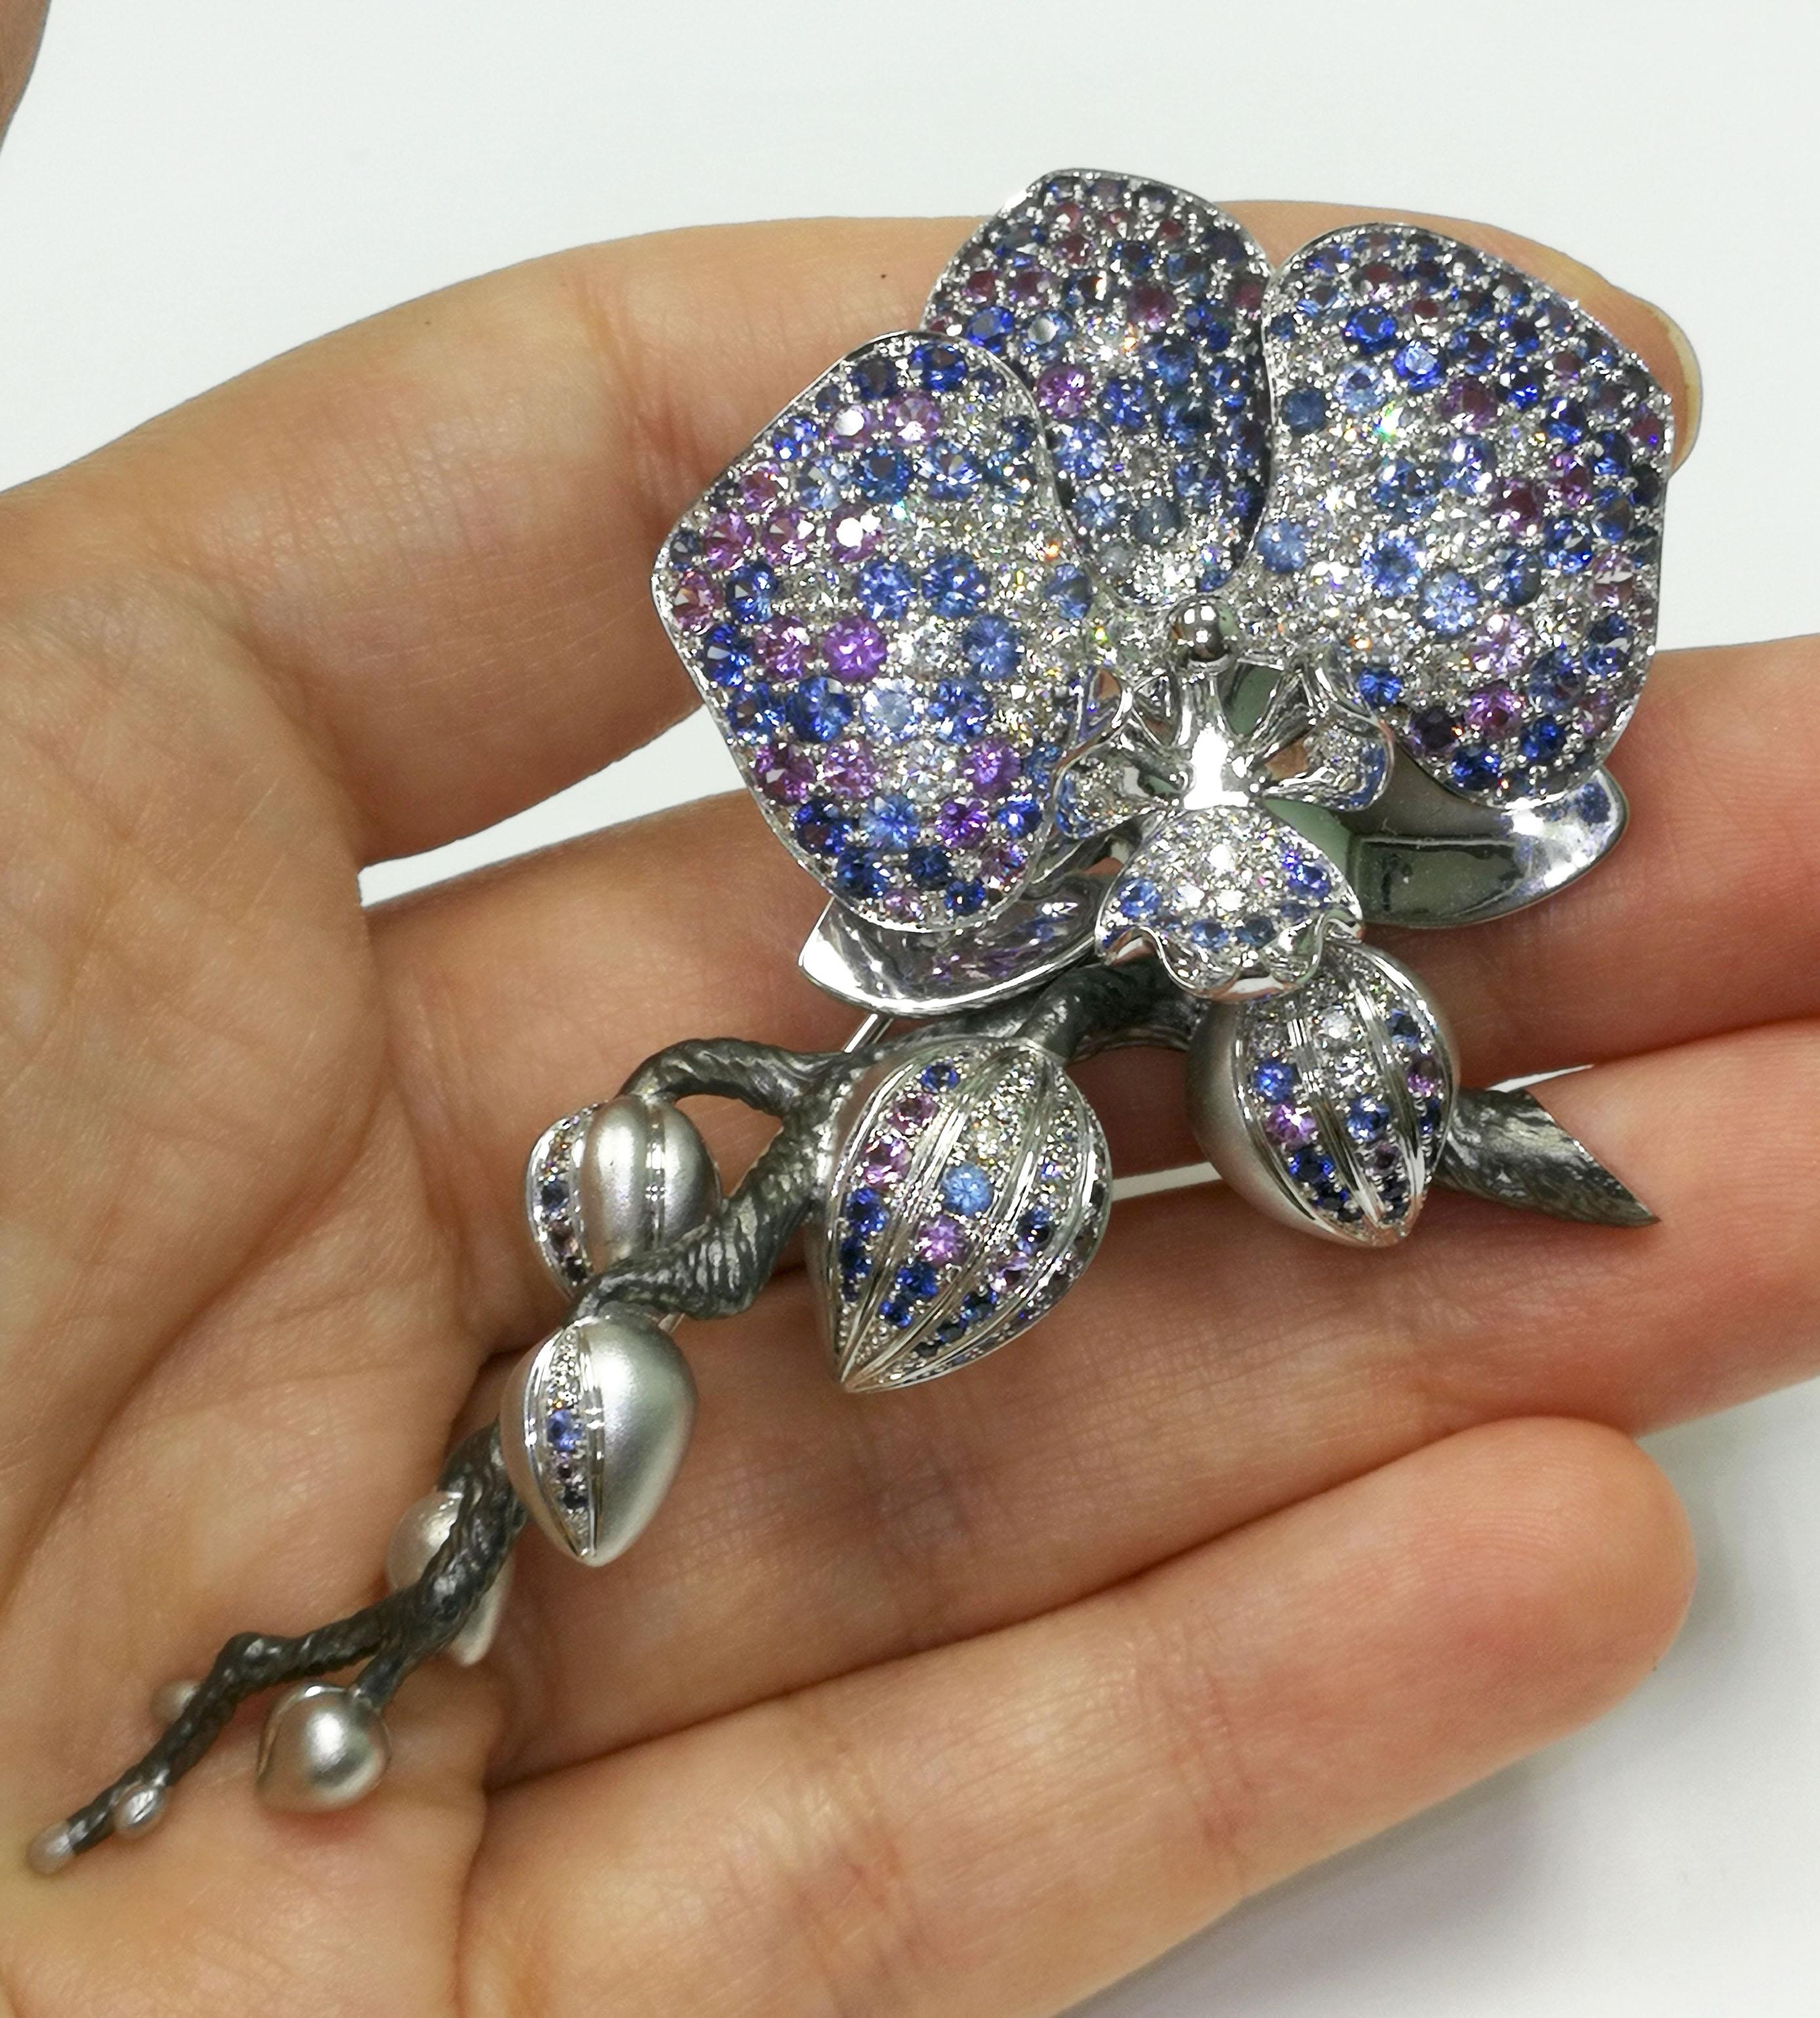 Blue and Purple Sapphires Diamonds 18 Karat White Gold Orchid Brooch
Orchid symbolized at different times a lot of things. Greek women had a theory that they could manipulate the sex of their unborn baby with the roots of an orchid. The Aztecs were